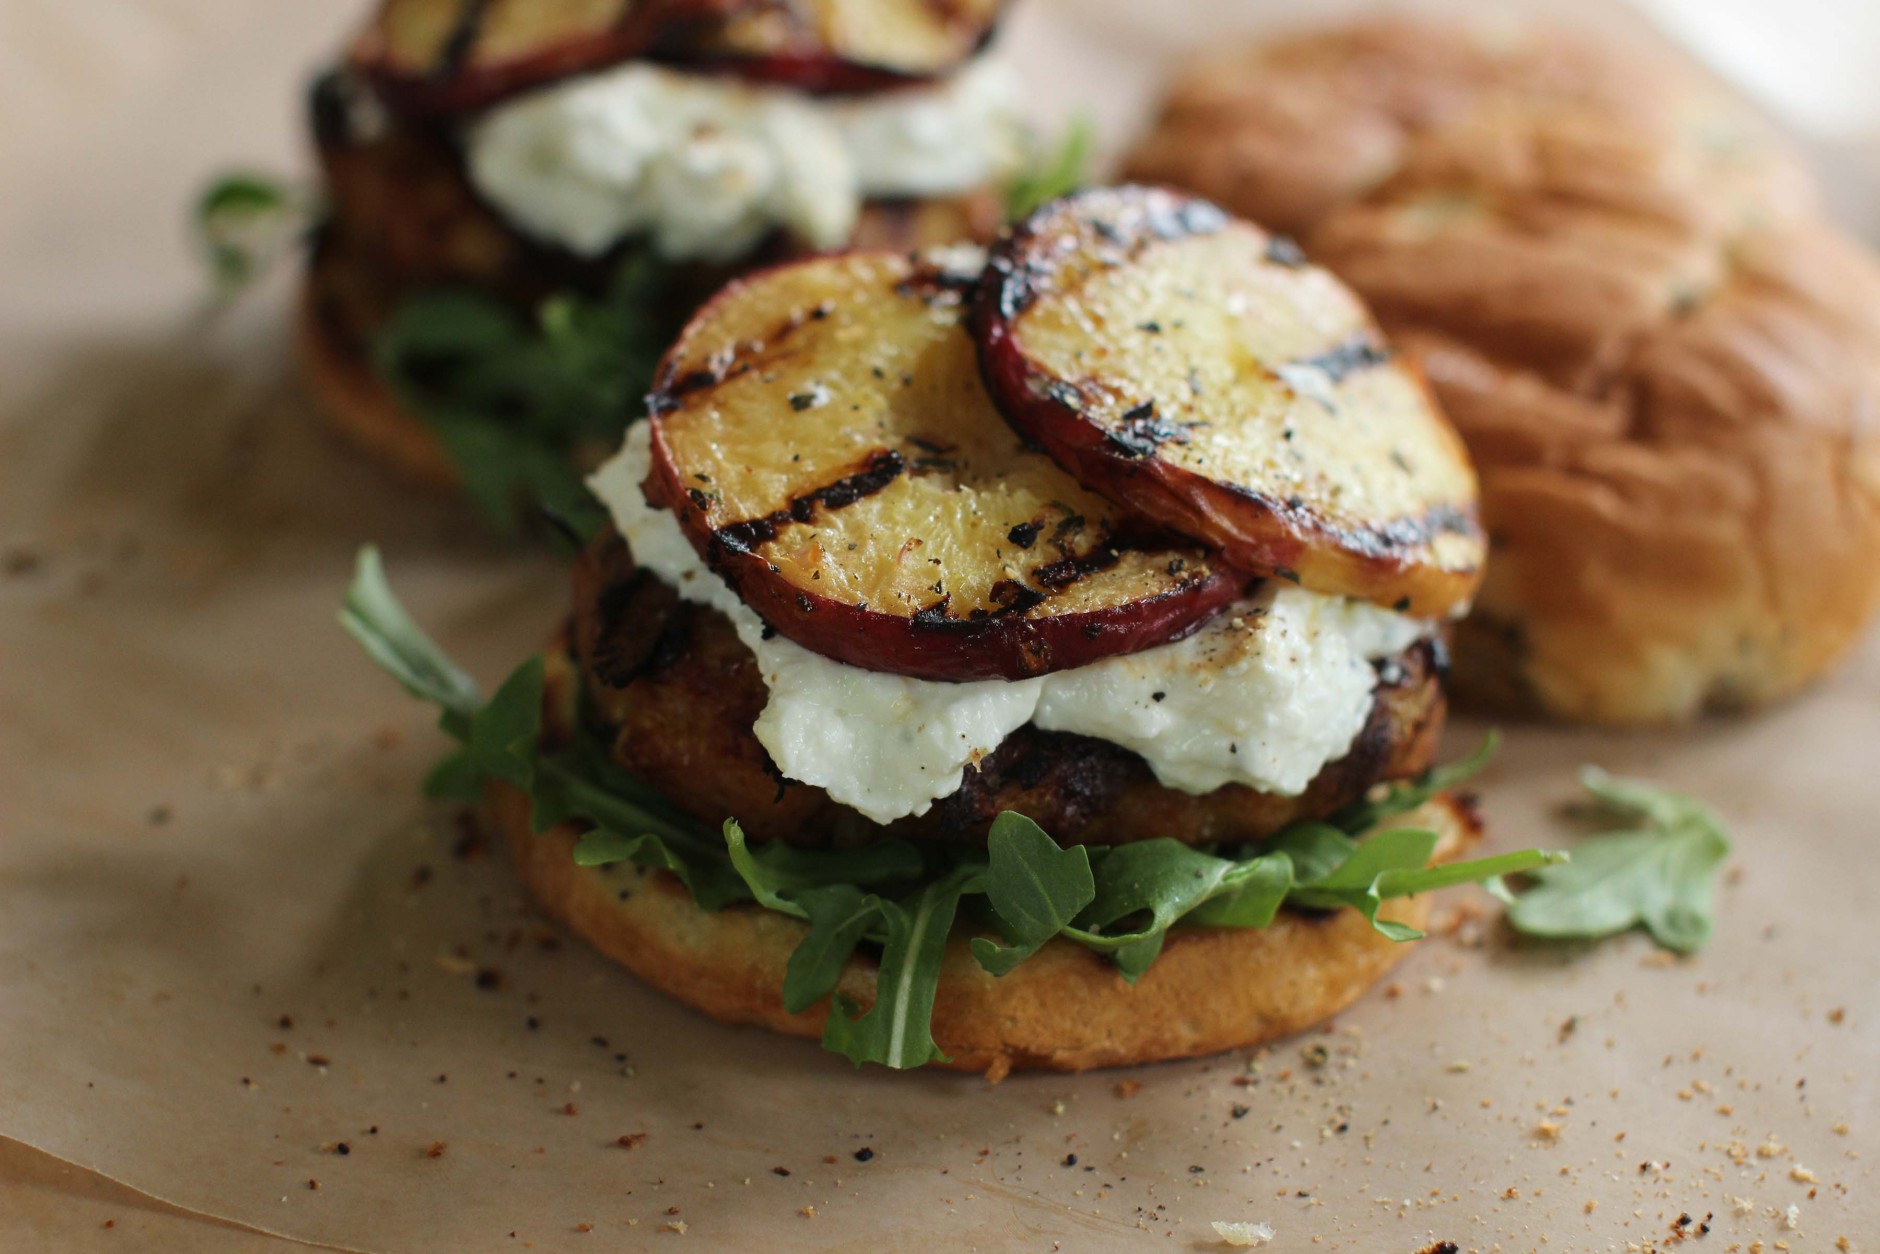 This June 1, 2015 photo shows turkey burgers with goat cheese and grilled peaches in Concord, N.H. (AP Photo/Matthew Mead